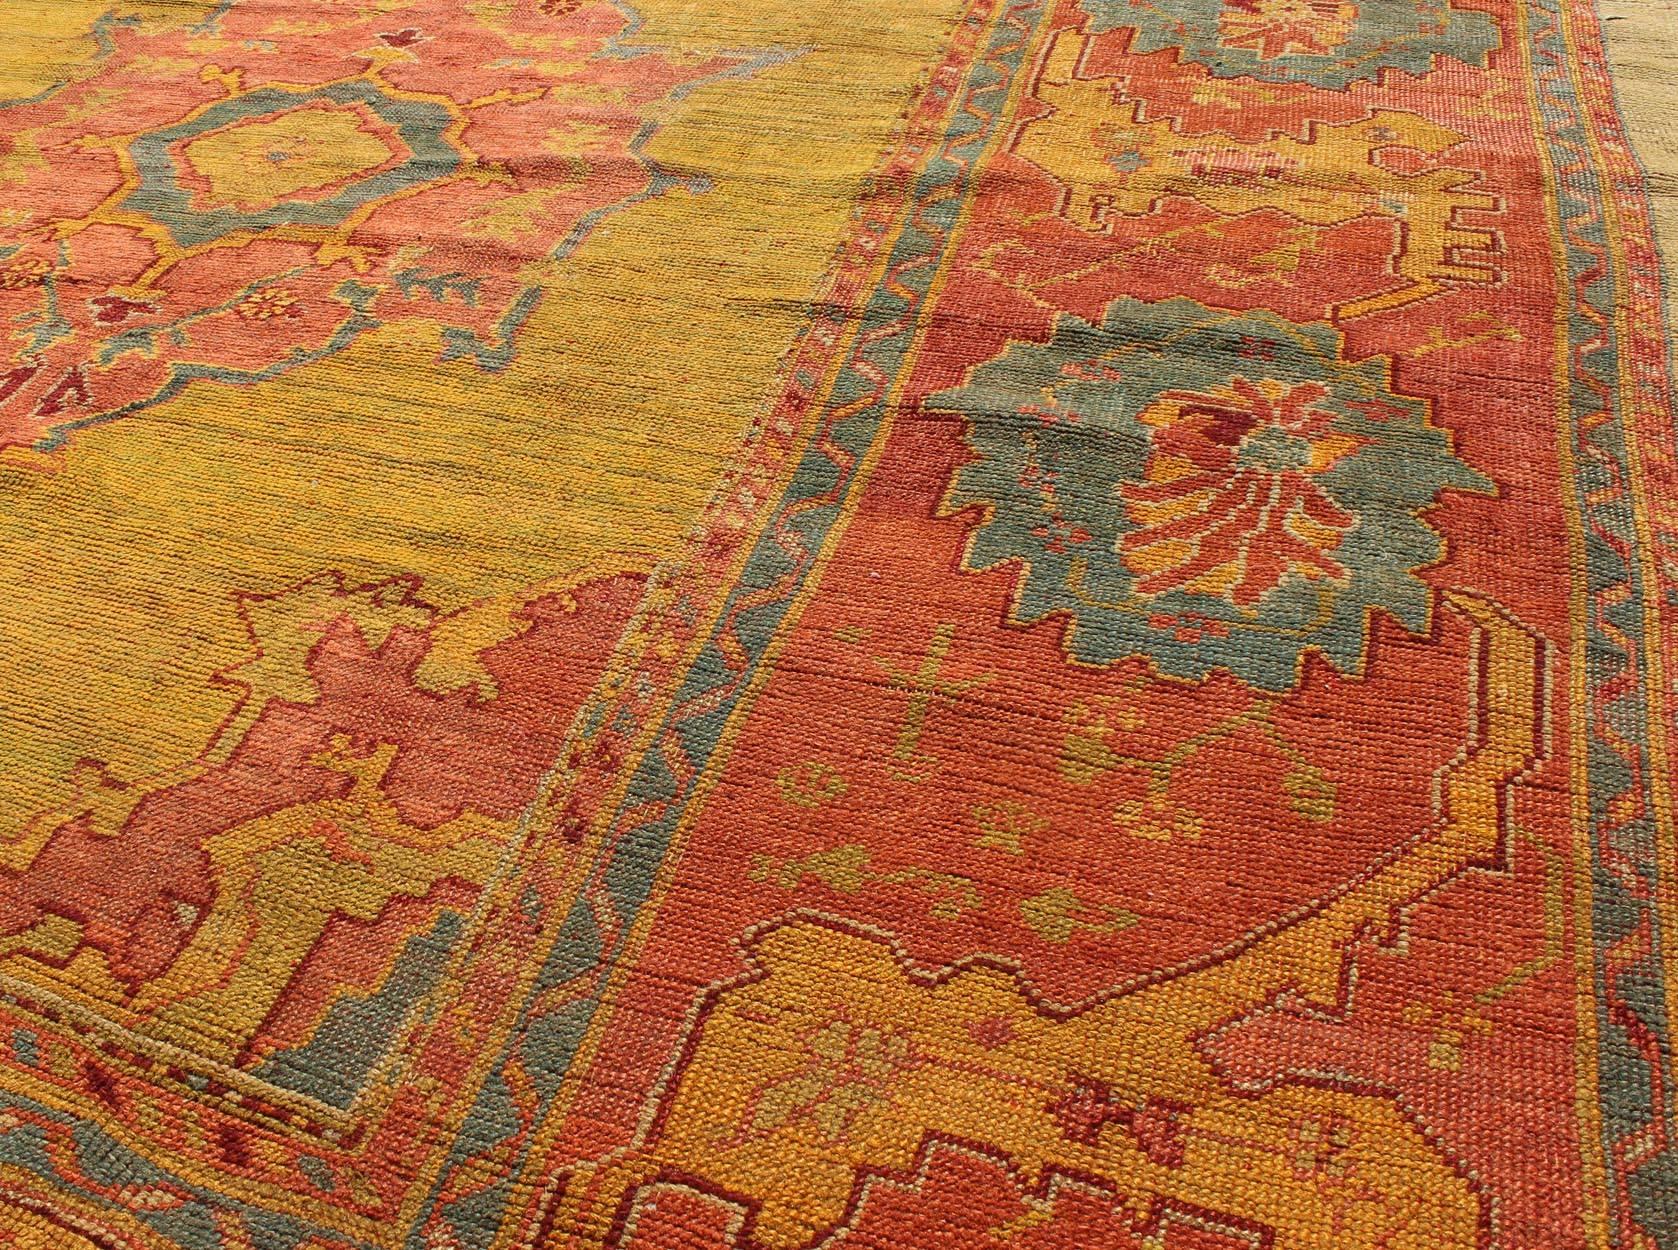 Antique Turkish Oushak Rug in  Saturated Gold, Orange Colors and Blue Accent  1